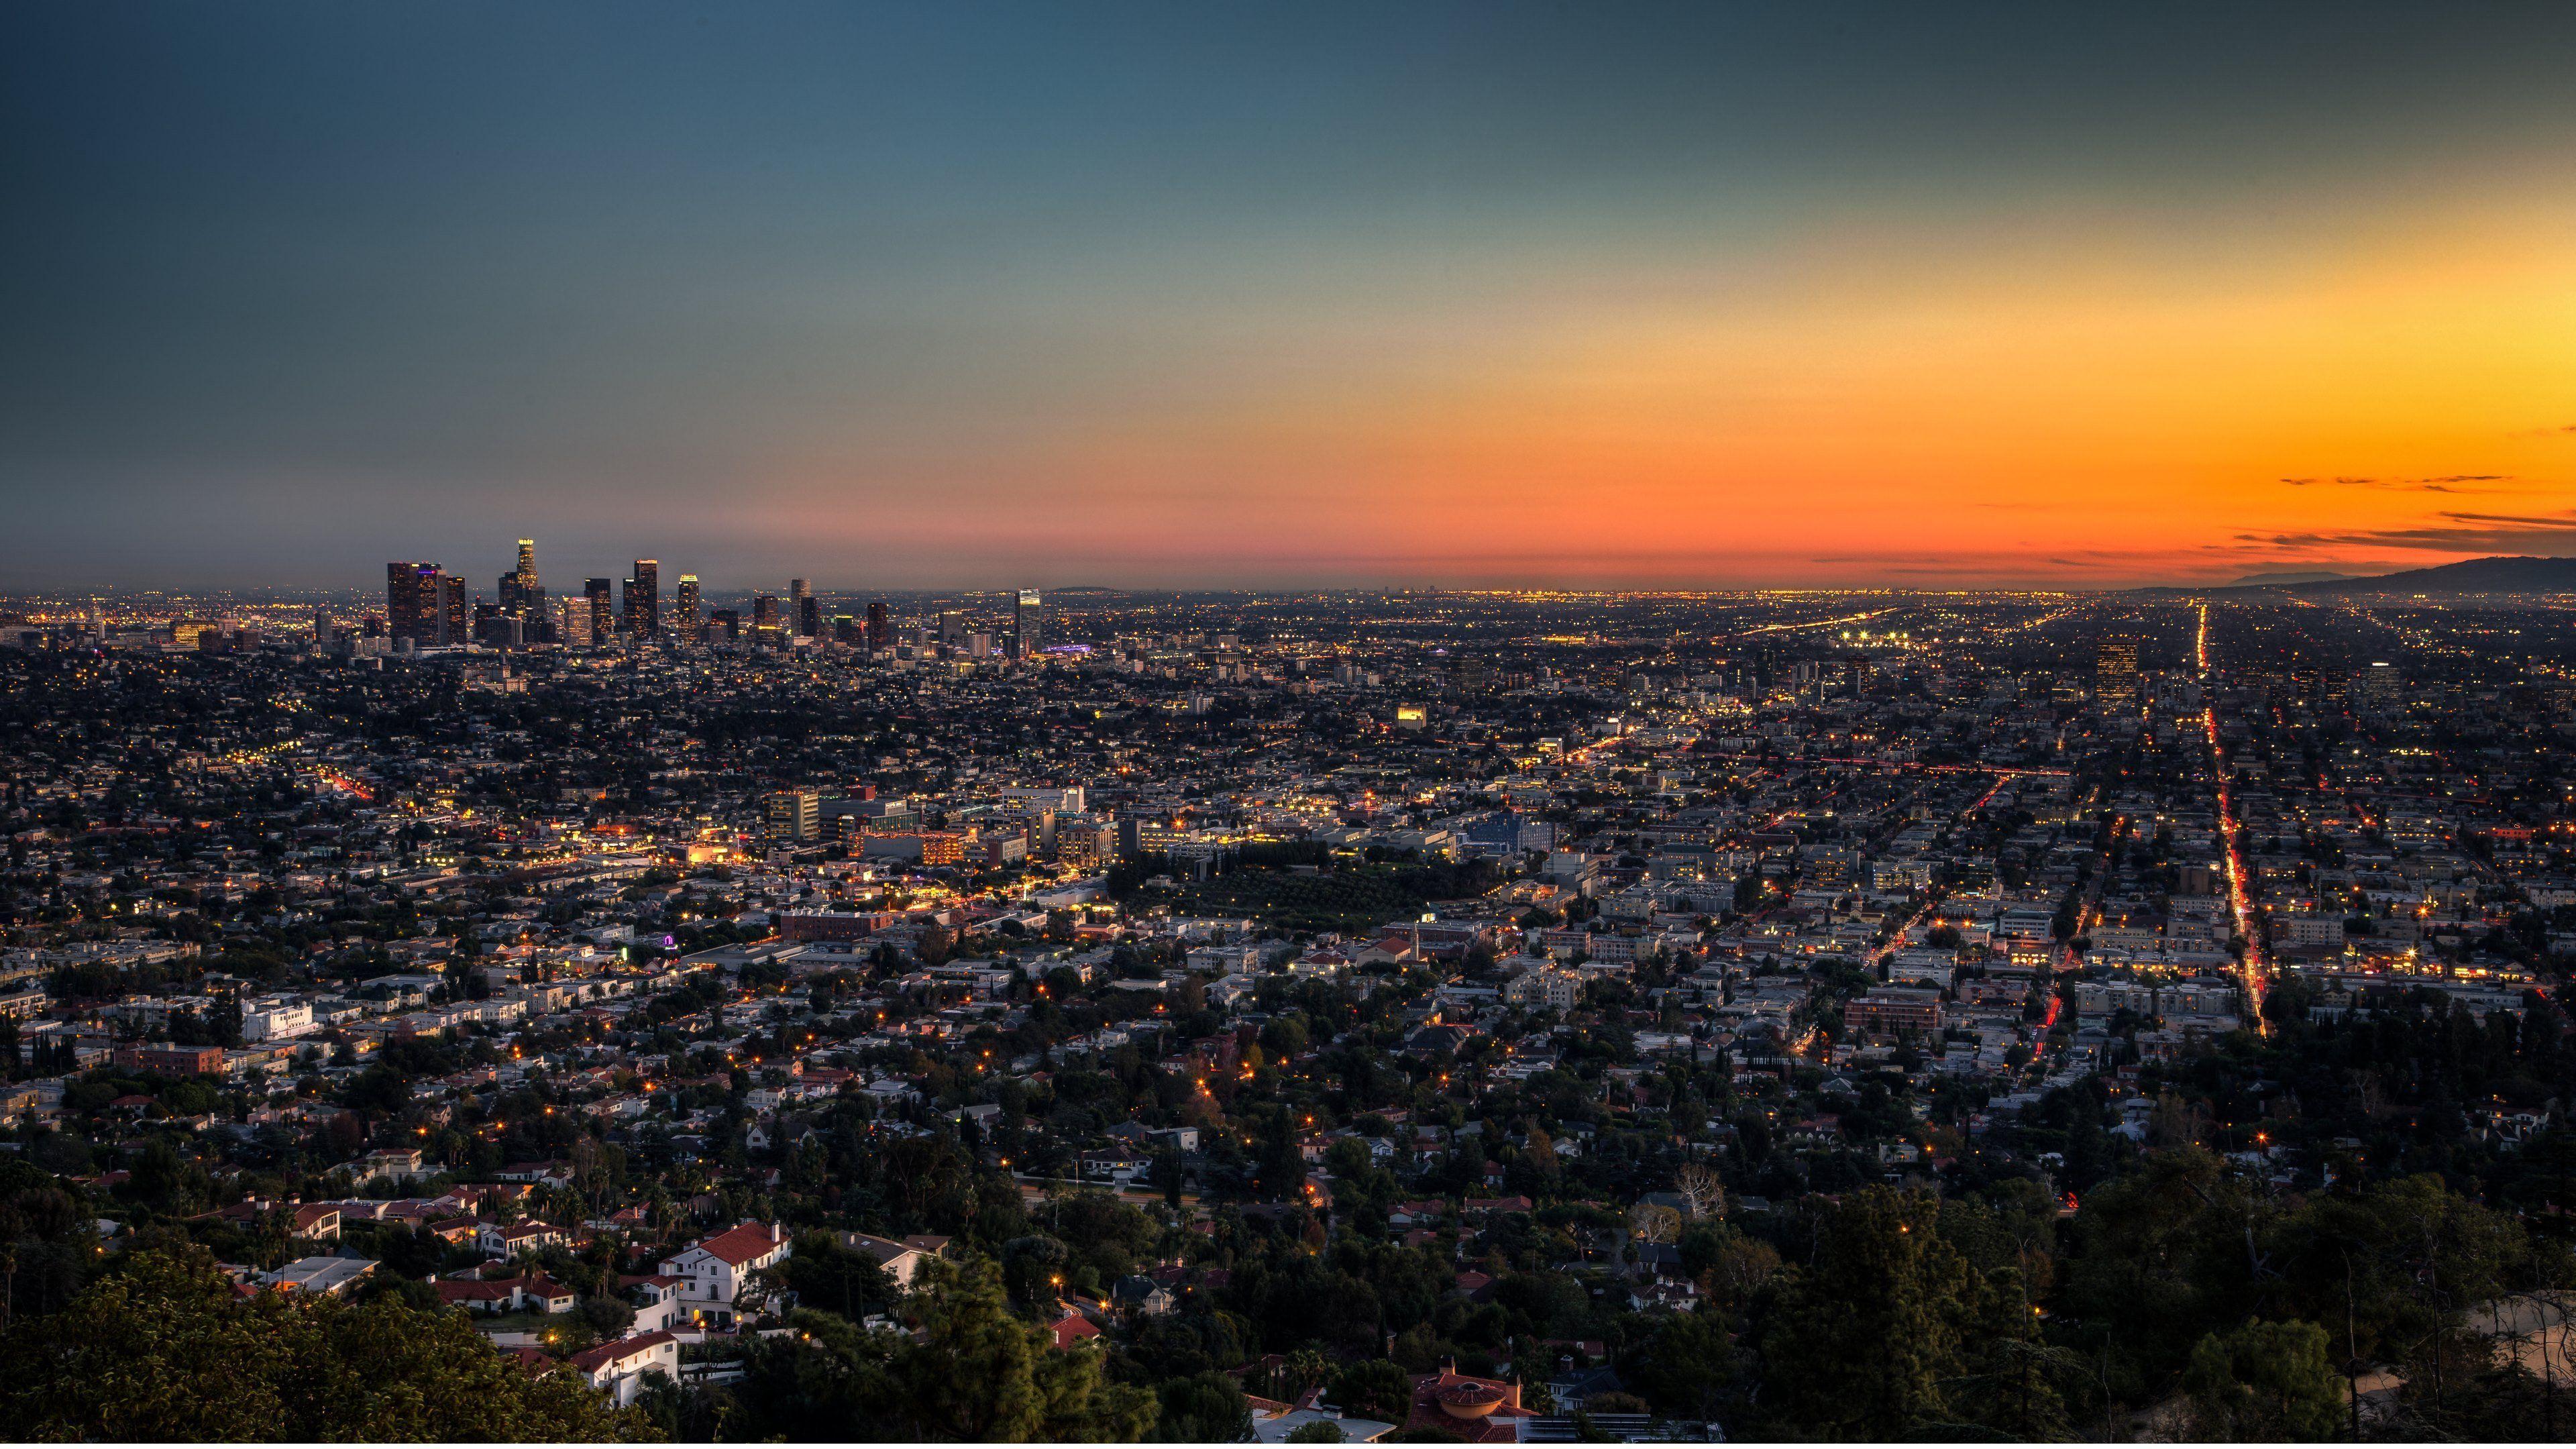 Los Angeles 4k Wallpapers Top Free Los Angeles 4k Backgrounds Wallpaperaccess